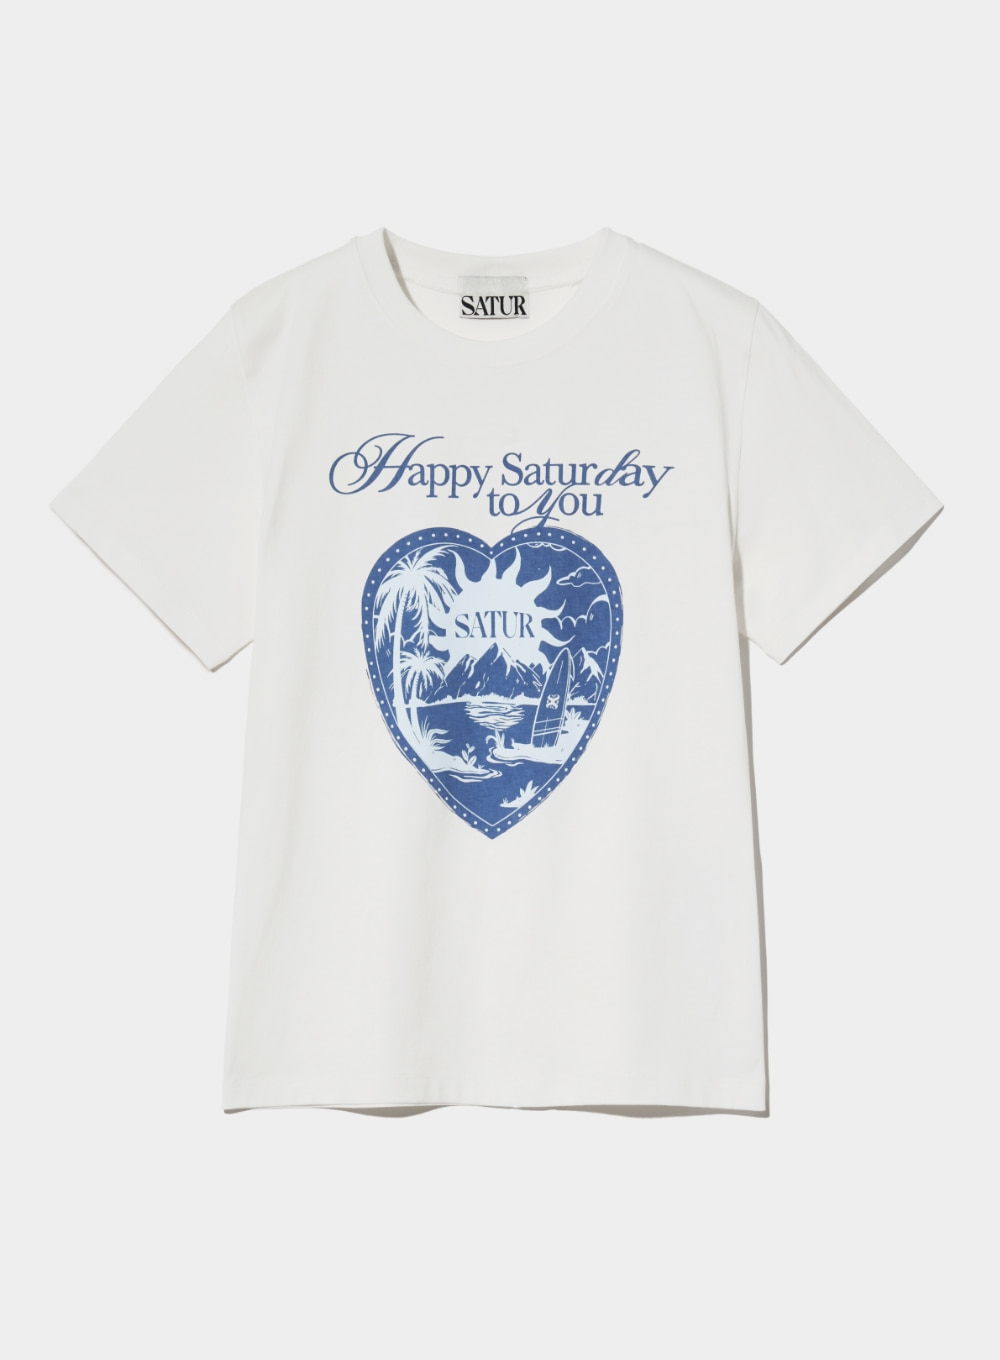 (W) Sunrise in Heart Graphic T-Shirt - Clean White